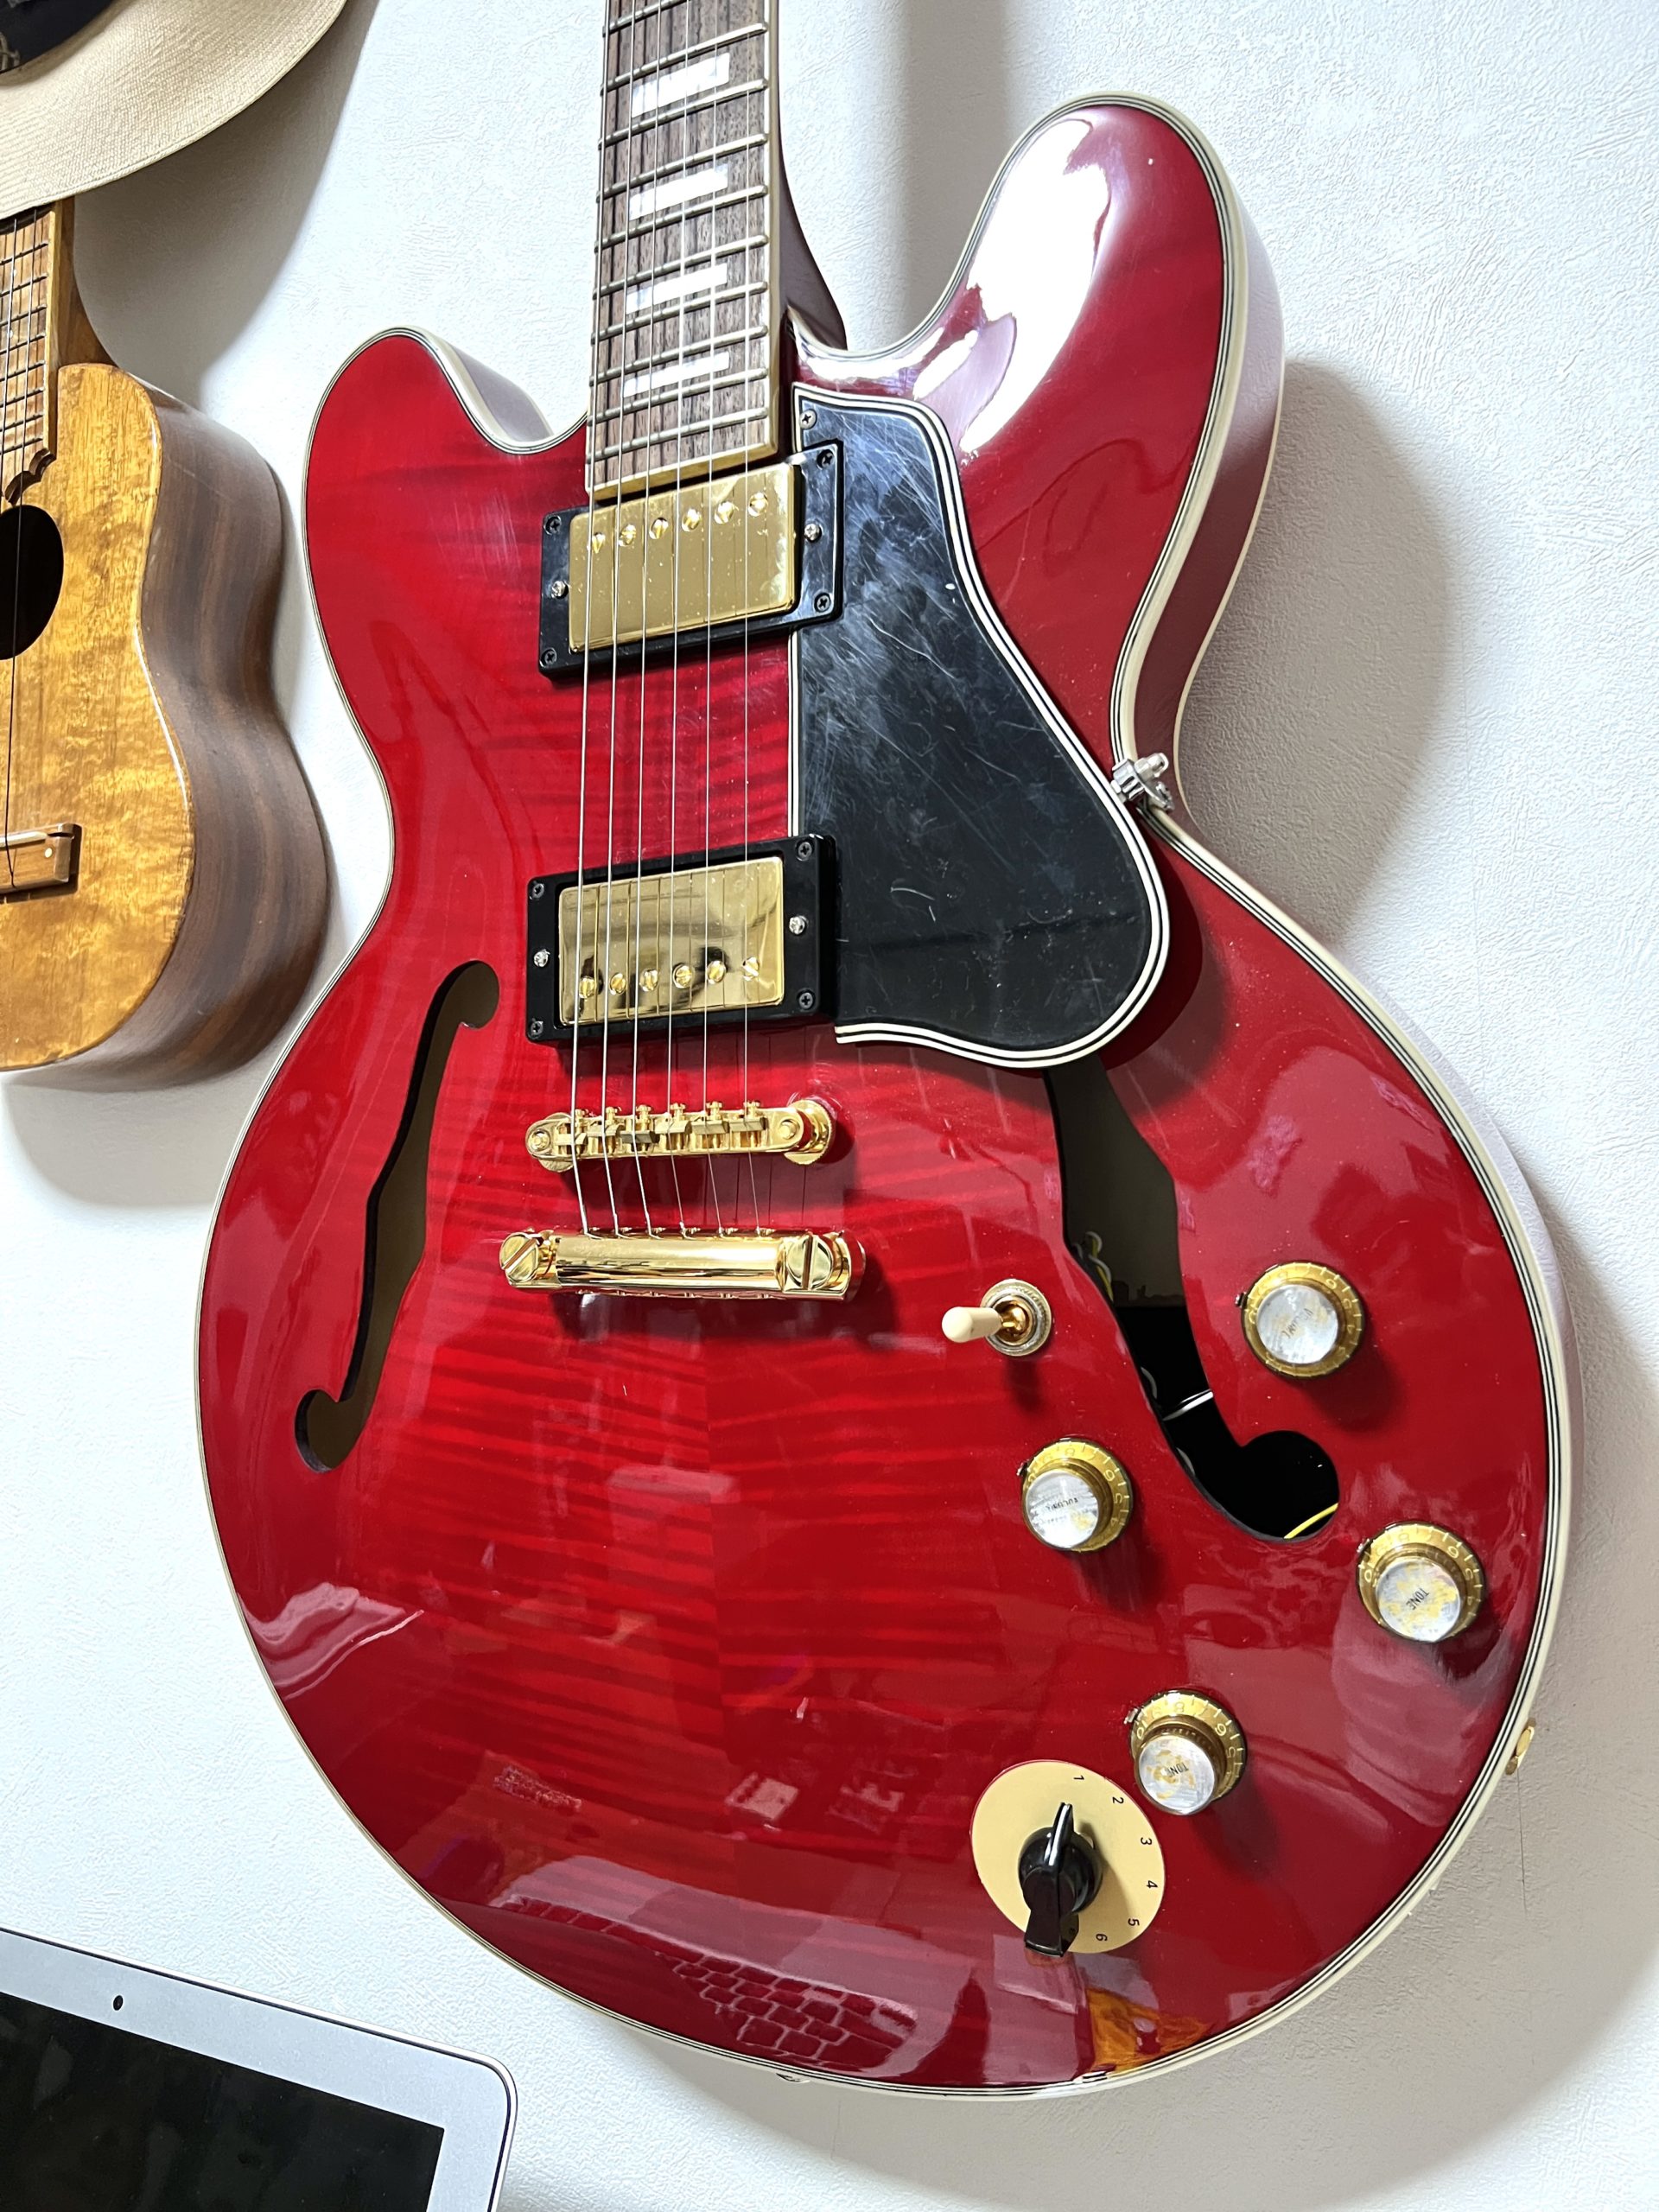 AliExpress ES-335 Gibson ES-355 Seth Lover Seymour Duncan SH-55 チブソン Chibson アリババ 中国製 335 Made In U.S.A. USA Lucille ABR-1 ブリッジ ポスト スタッド 抜く M8ボルト ナット 57 Classic Varitone Epiphone 配線図